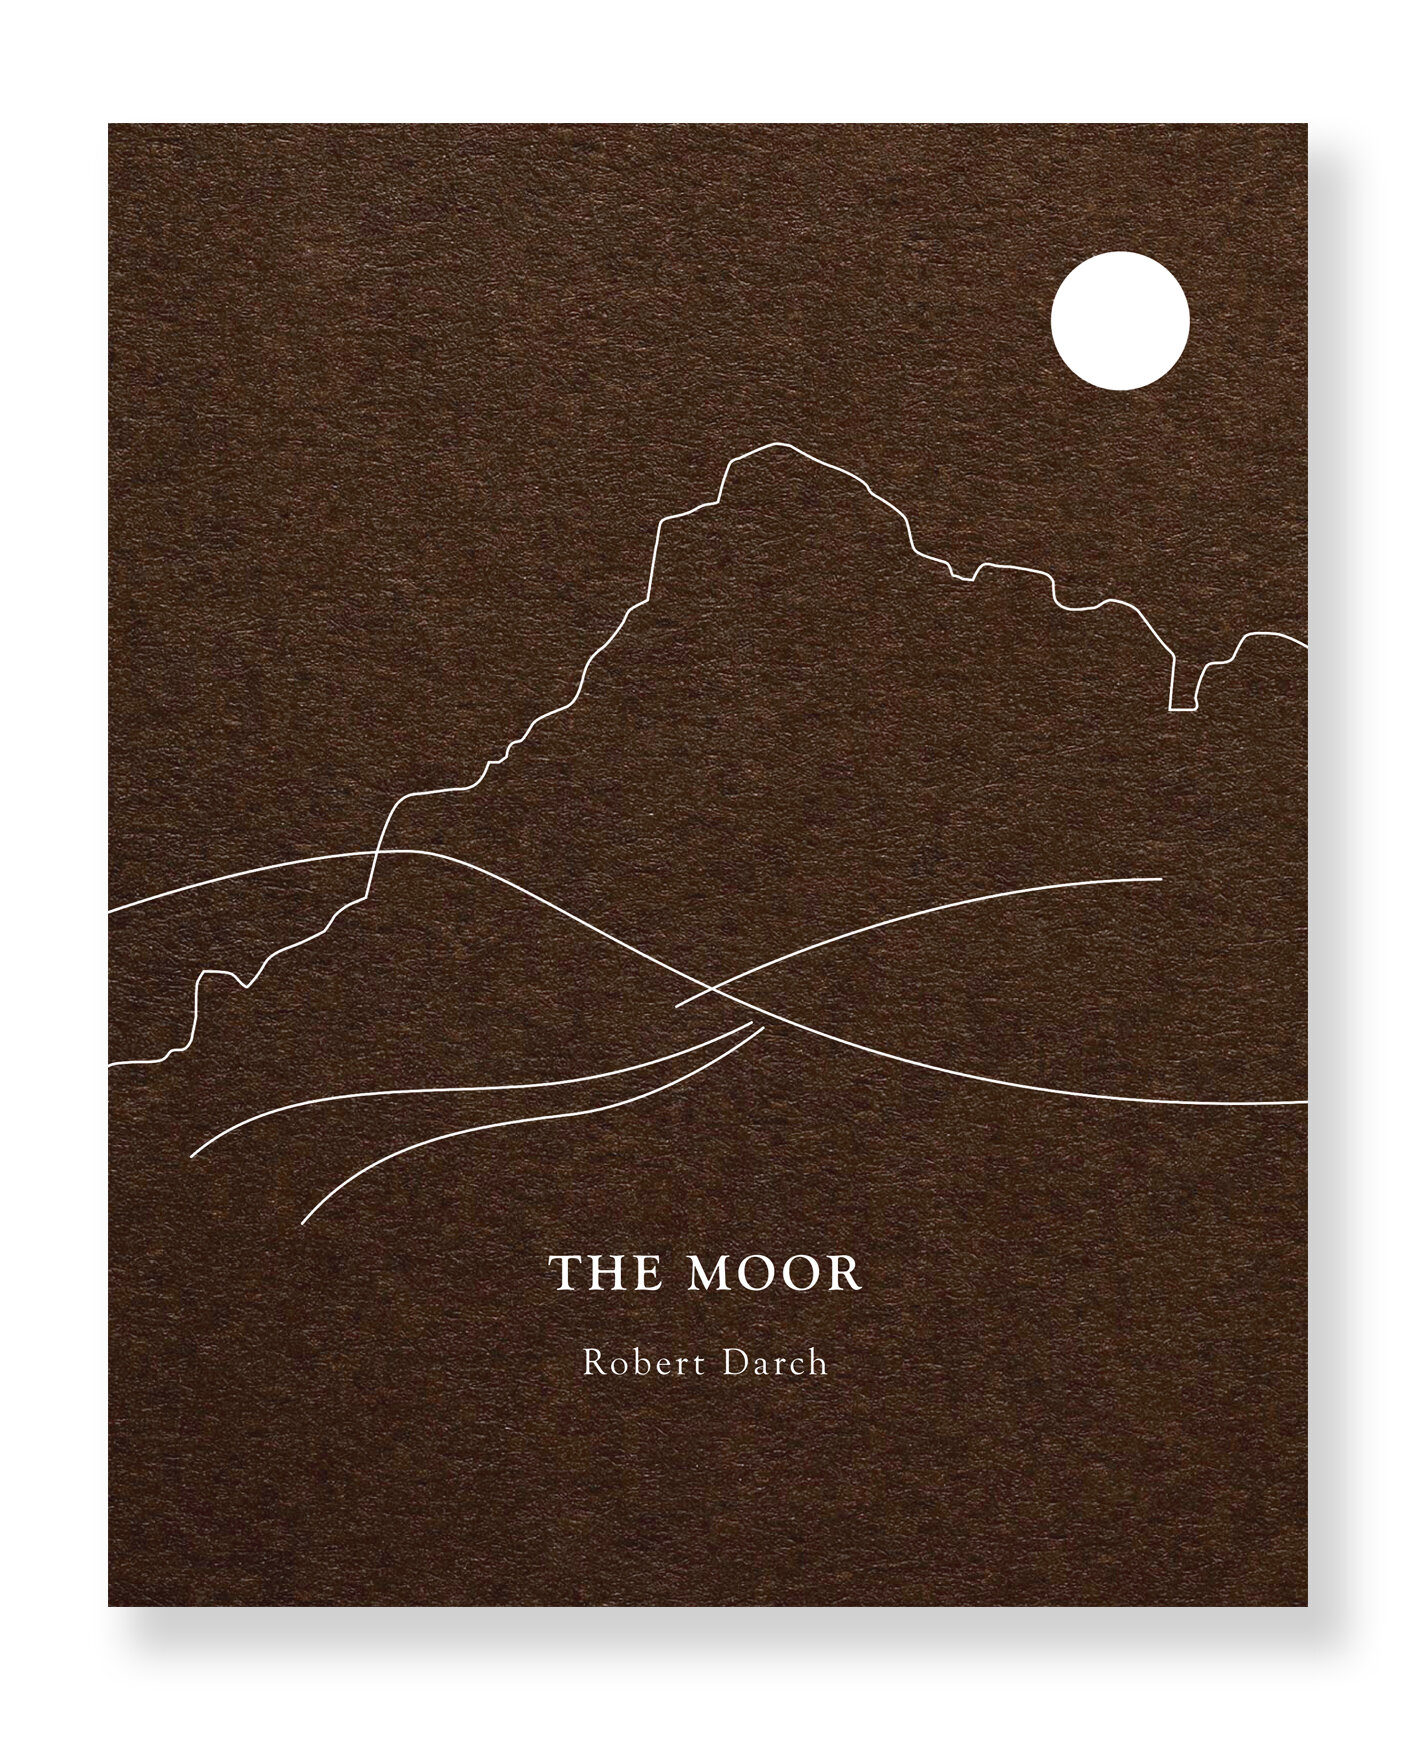 themoor-cover_Darch.jpg